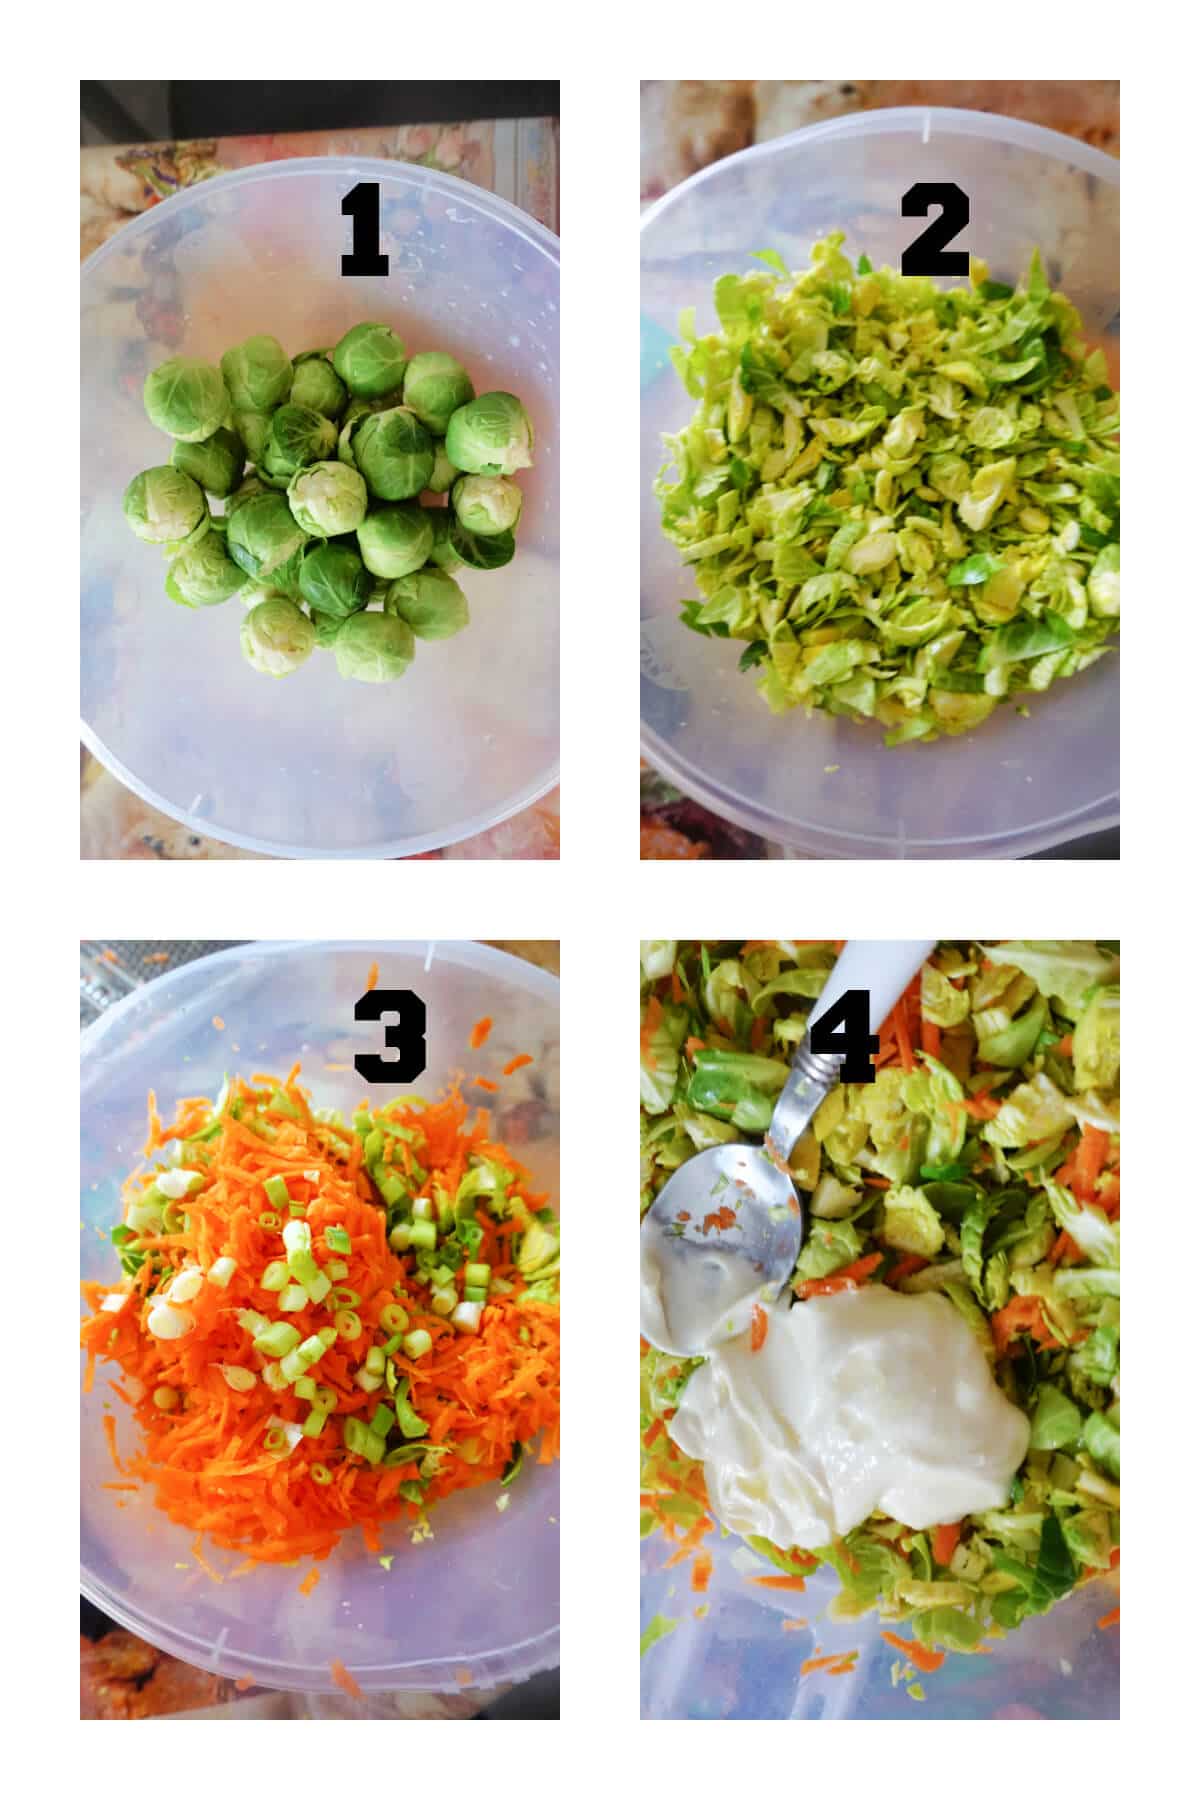 Collage of 4 photos to show how to make brussel sprout slaw